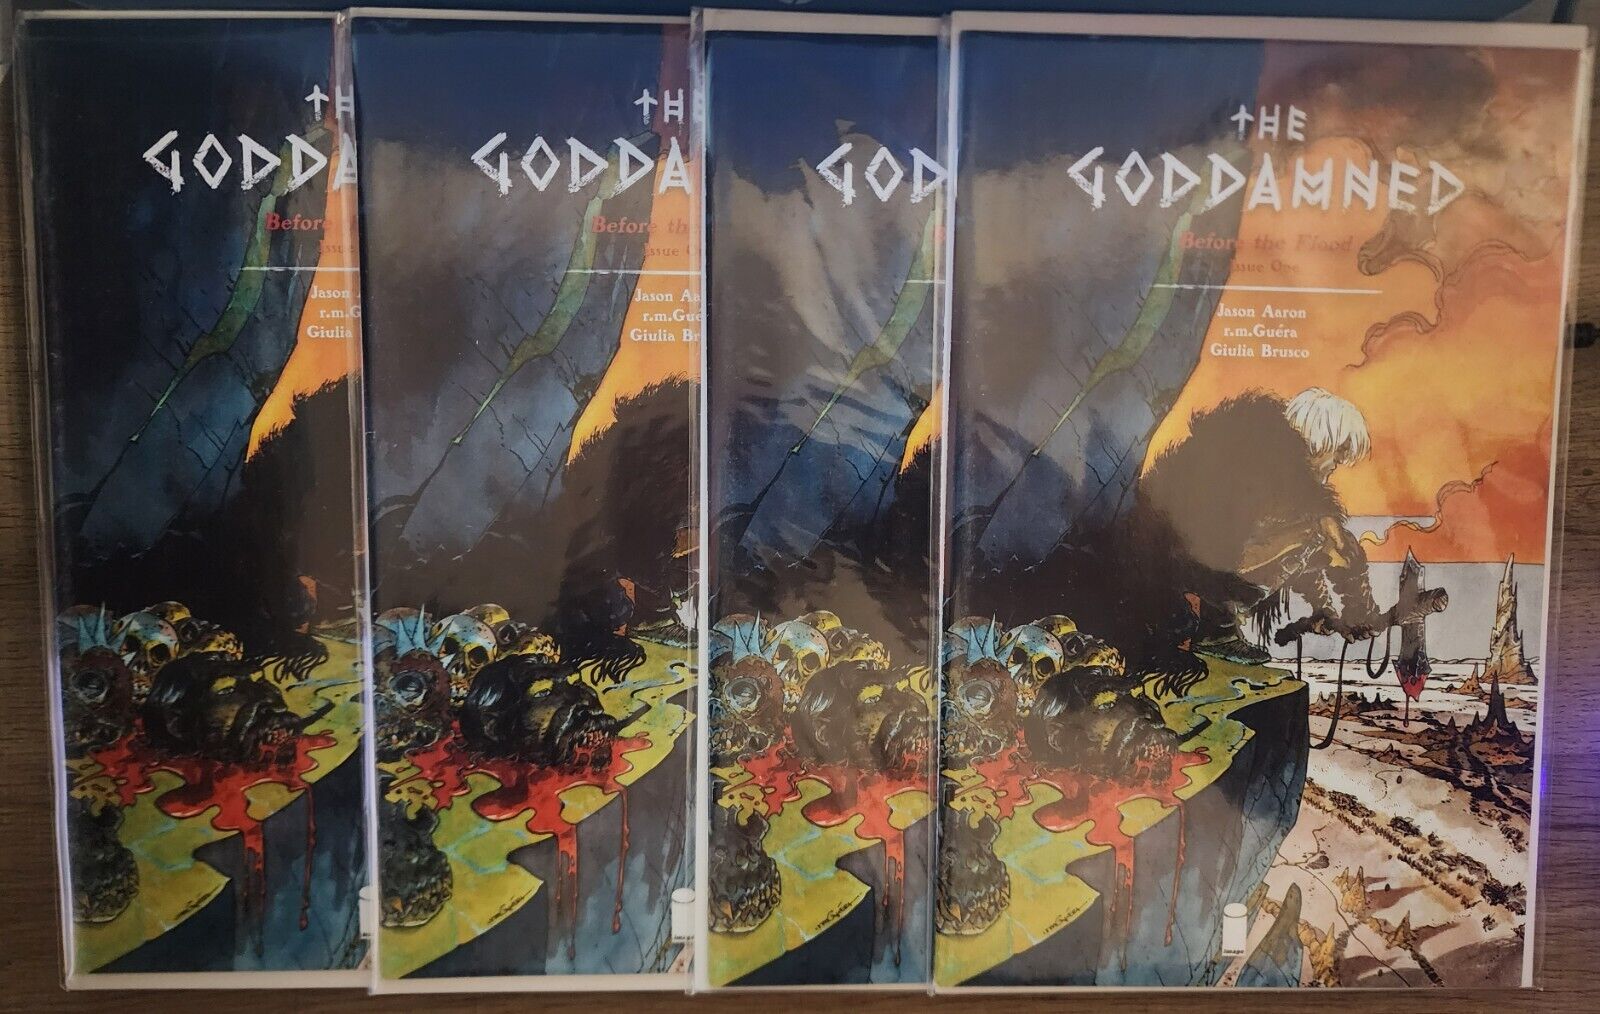 The Goddamned Before The Flood 1 Dealer Lot of 4 Image Comics